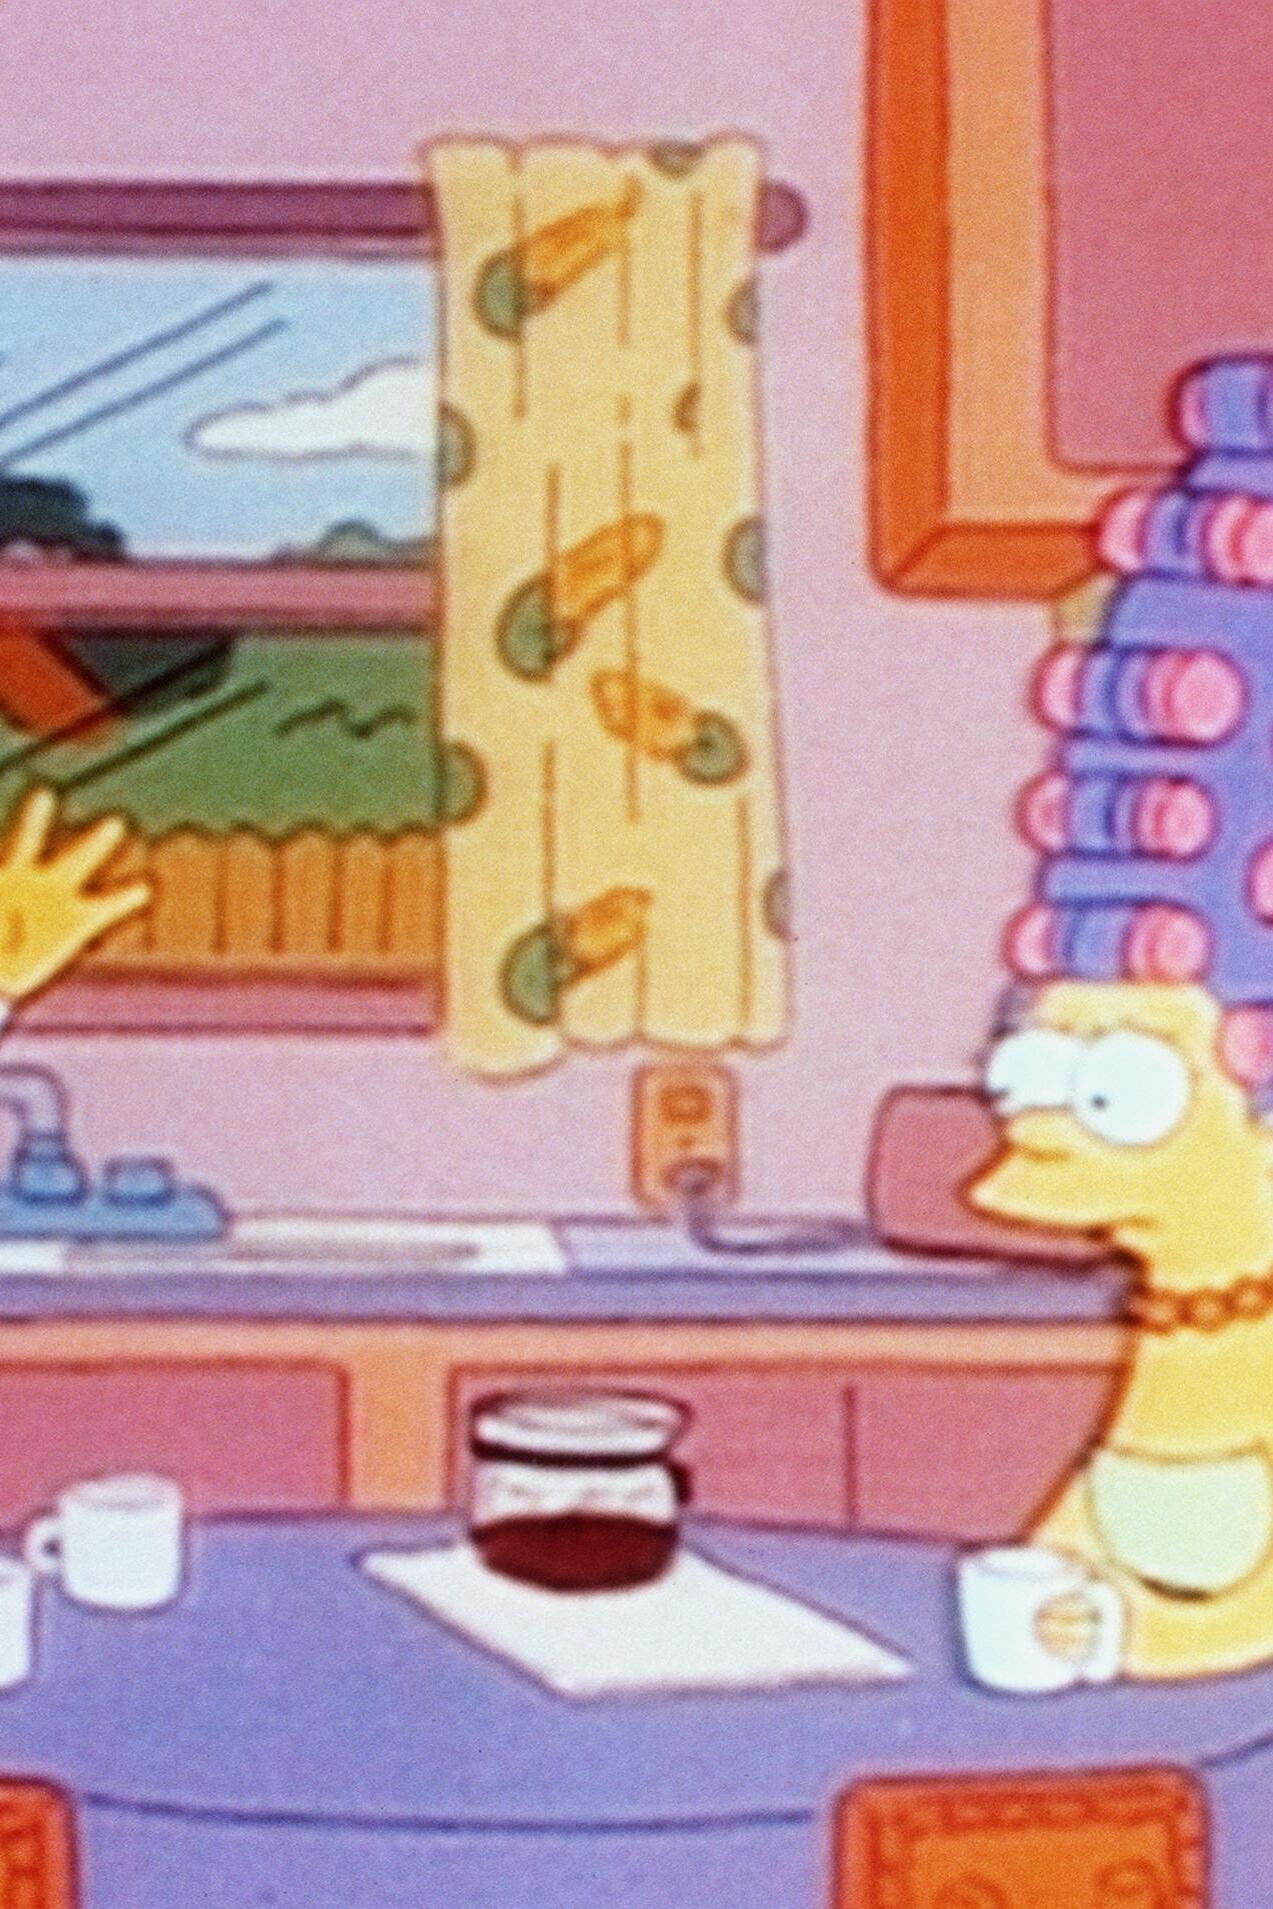 The Simpsons - Brush with Greatness